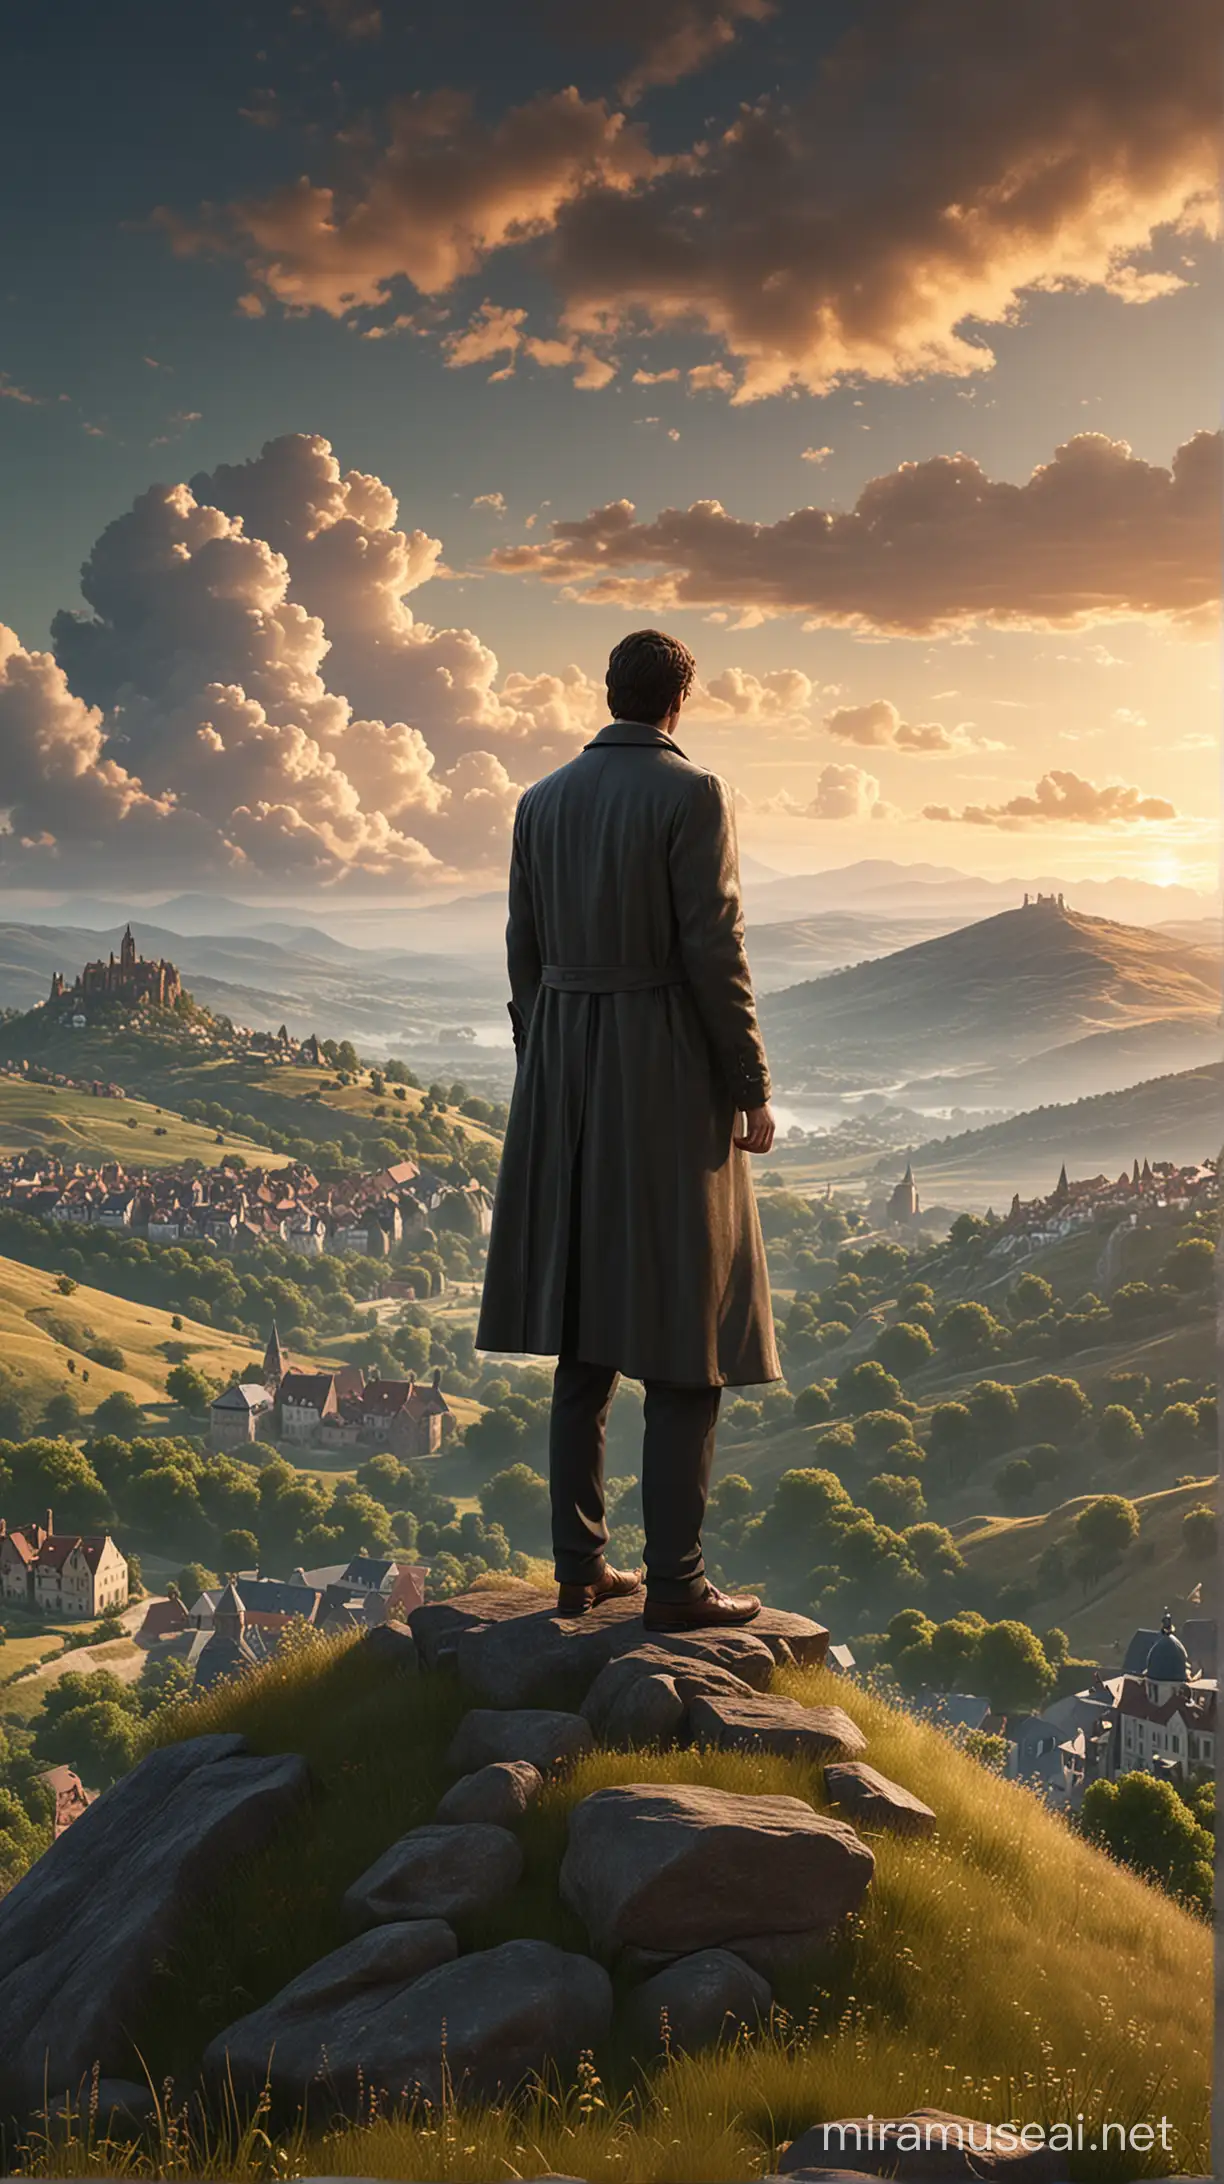 An awe-inspiring 3D render illustration of a tall and enigmatic man standing proudly atop a hill, with a commanding view of the breathtaking landscape below. He dons an elegant topcoat, with his back turned to the viewer, further deepening the mystery surrounding his character. The hill slopes gently, revealing a picturesque panorama of rolling hills, quaint towns, and lush greenery. The horizon seamlessly merges with the sky, painting a dreamy, mesmerizing tableau of colors that evoke a sense of wonder and adventure. The cinematic quality of the scene transports the viewer into a captivating world of storytelling and intrigue.